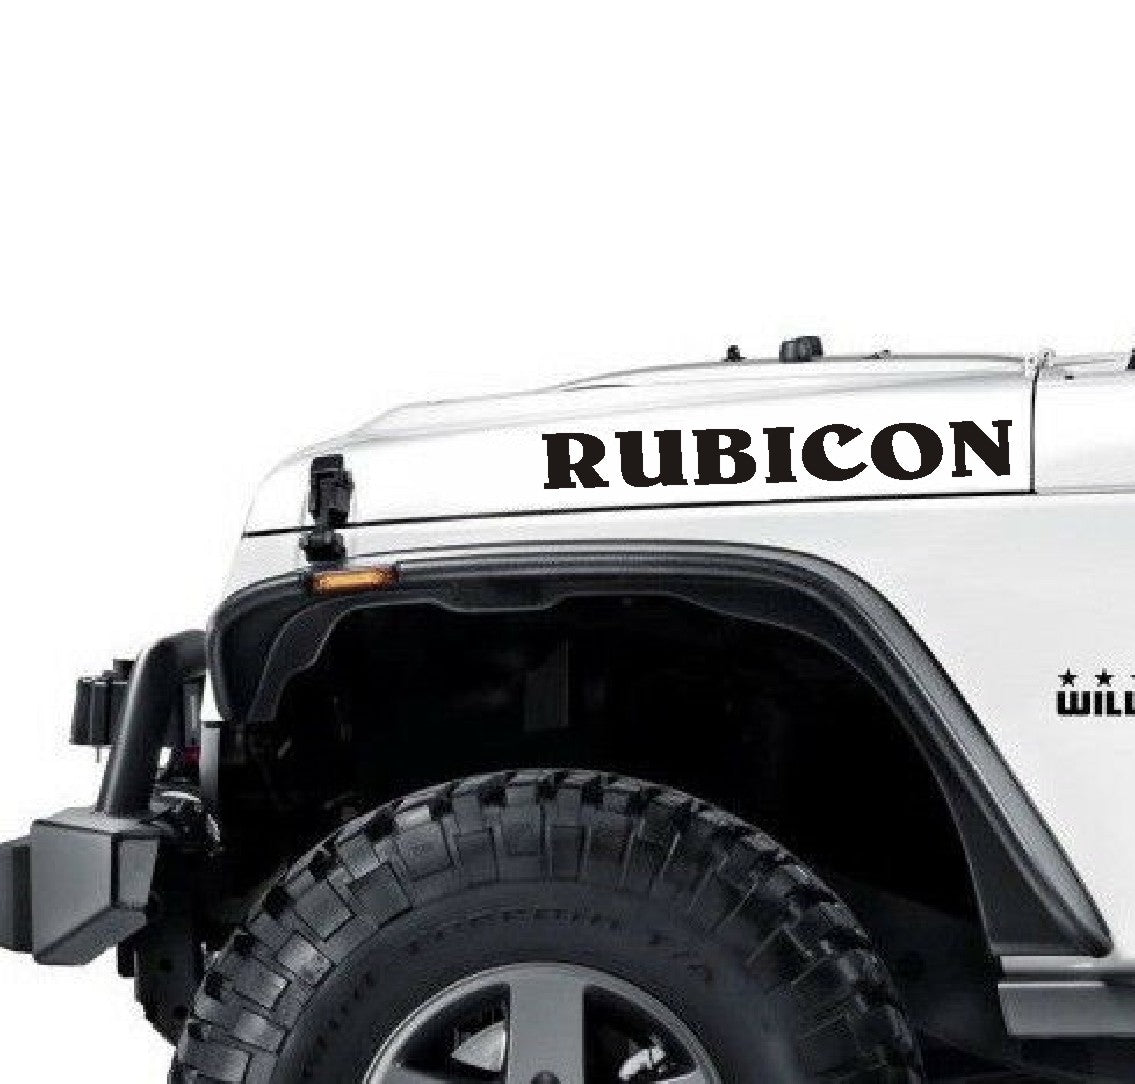 Rubicon Decal